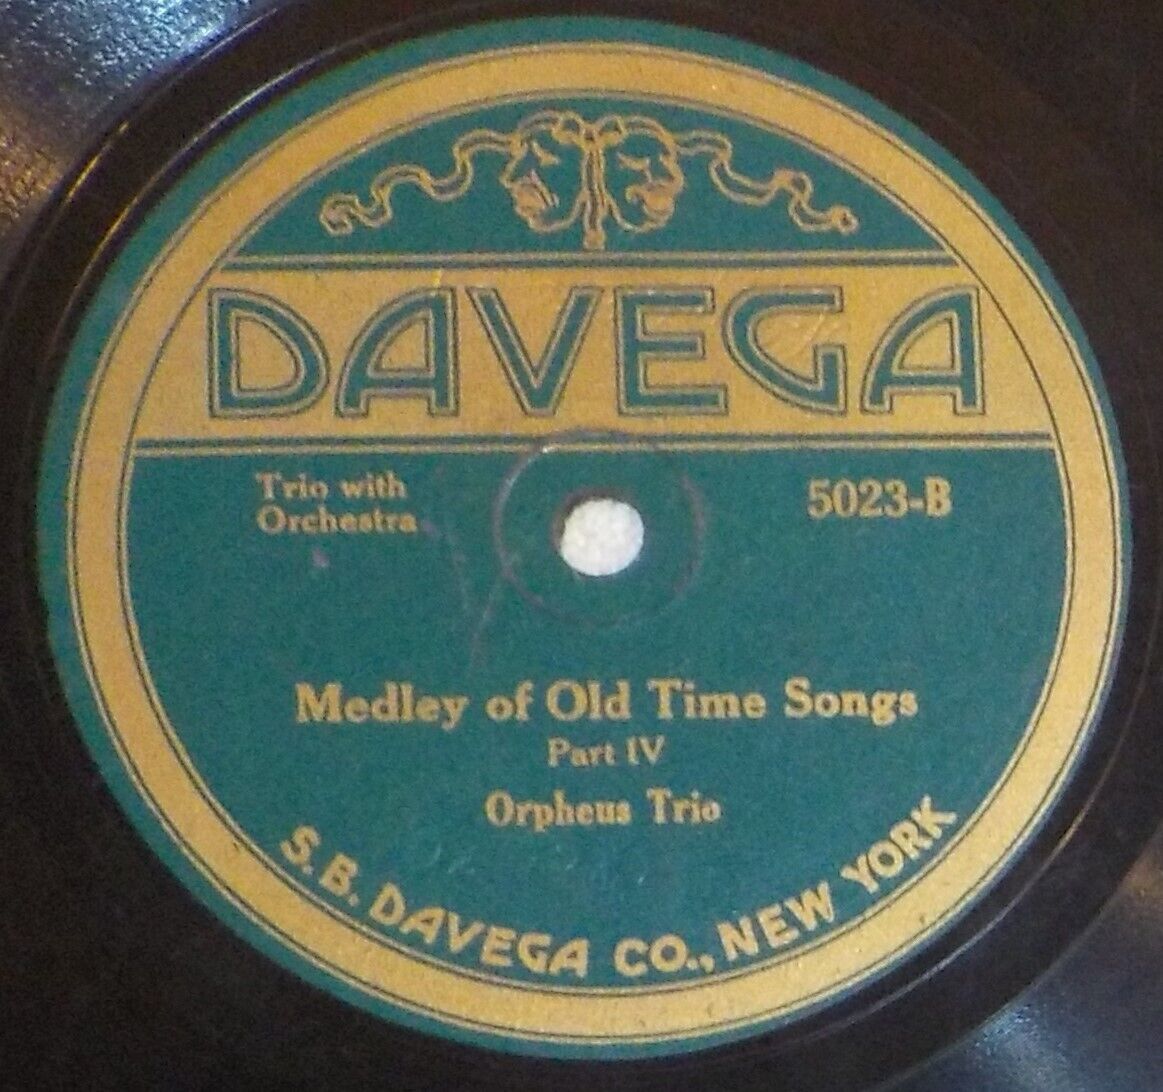 Orpheus Trio 78 DAVEGA 5023 Medley Of Old Time Songs Part III / Part IV SH2F